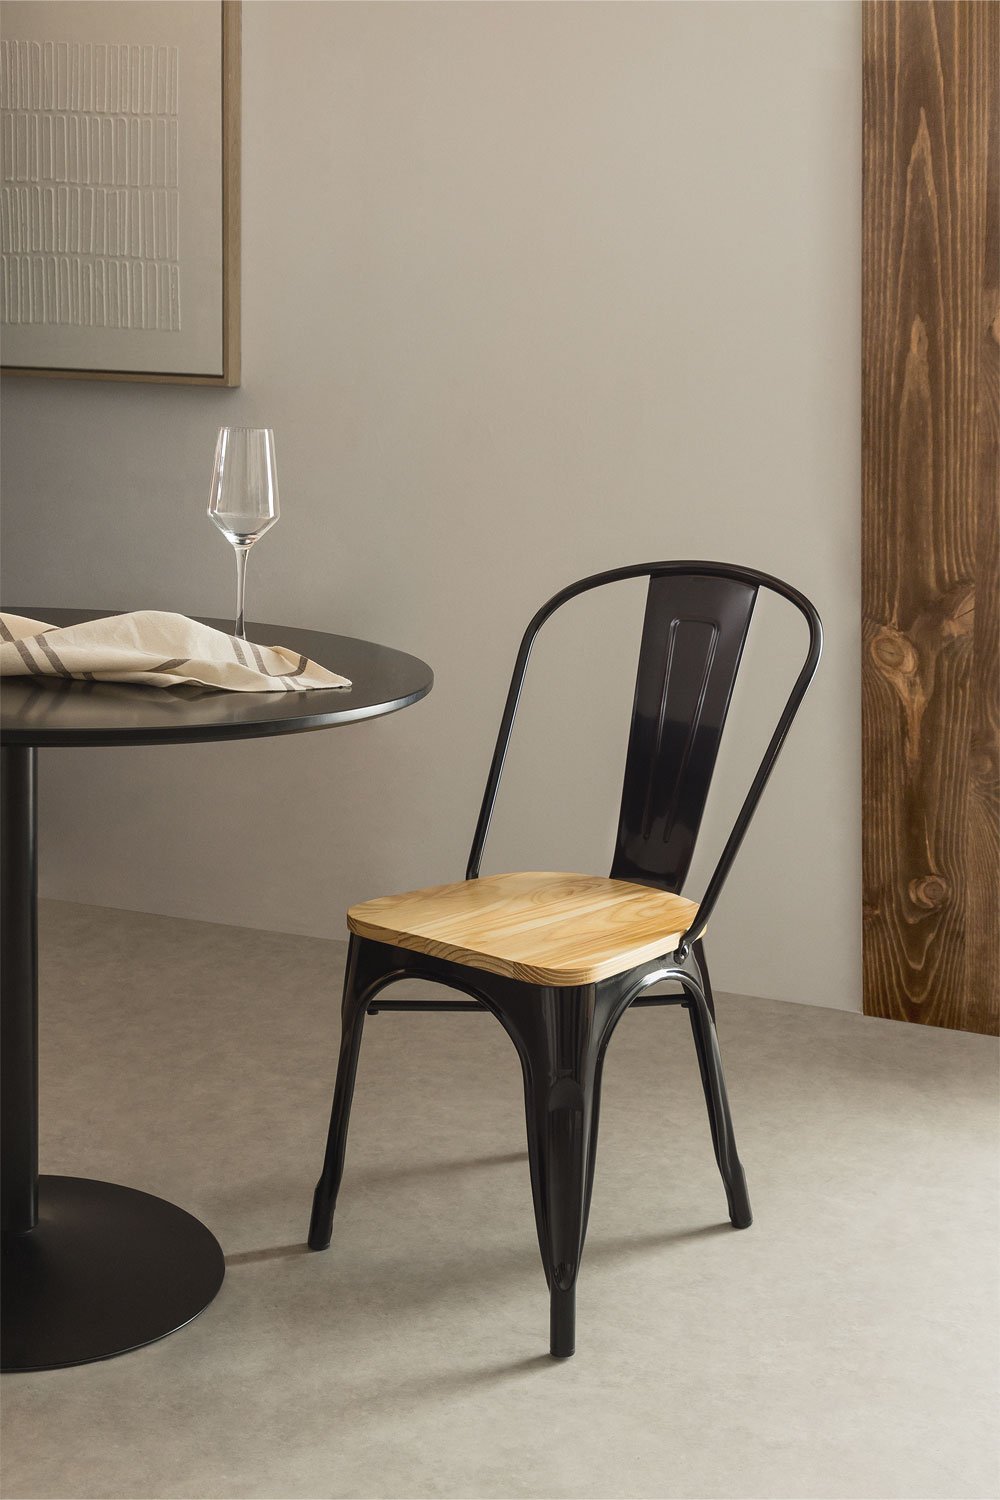 Stackable wooden chair LIX, gallery image 1